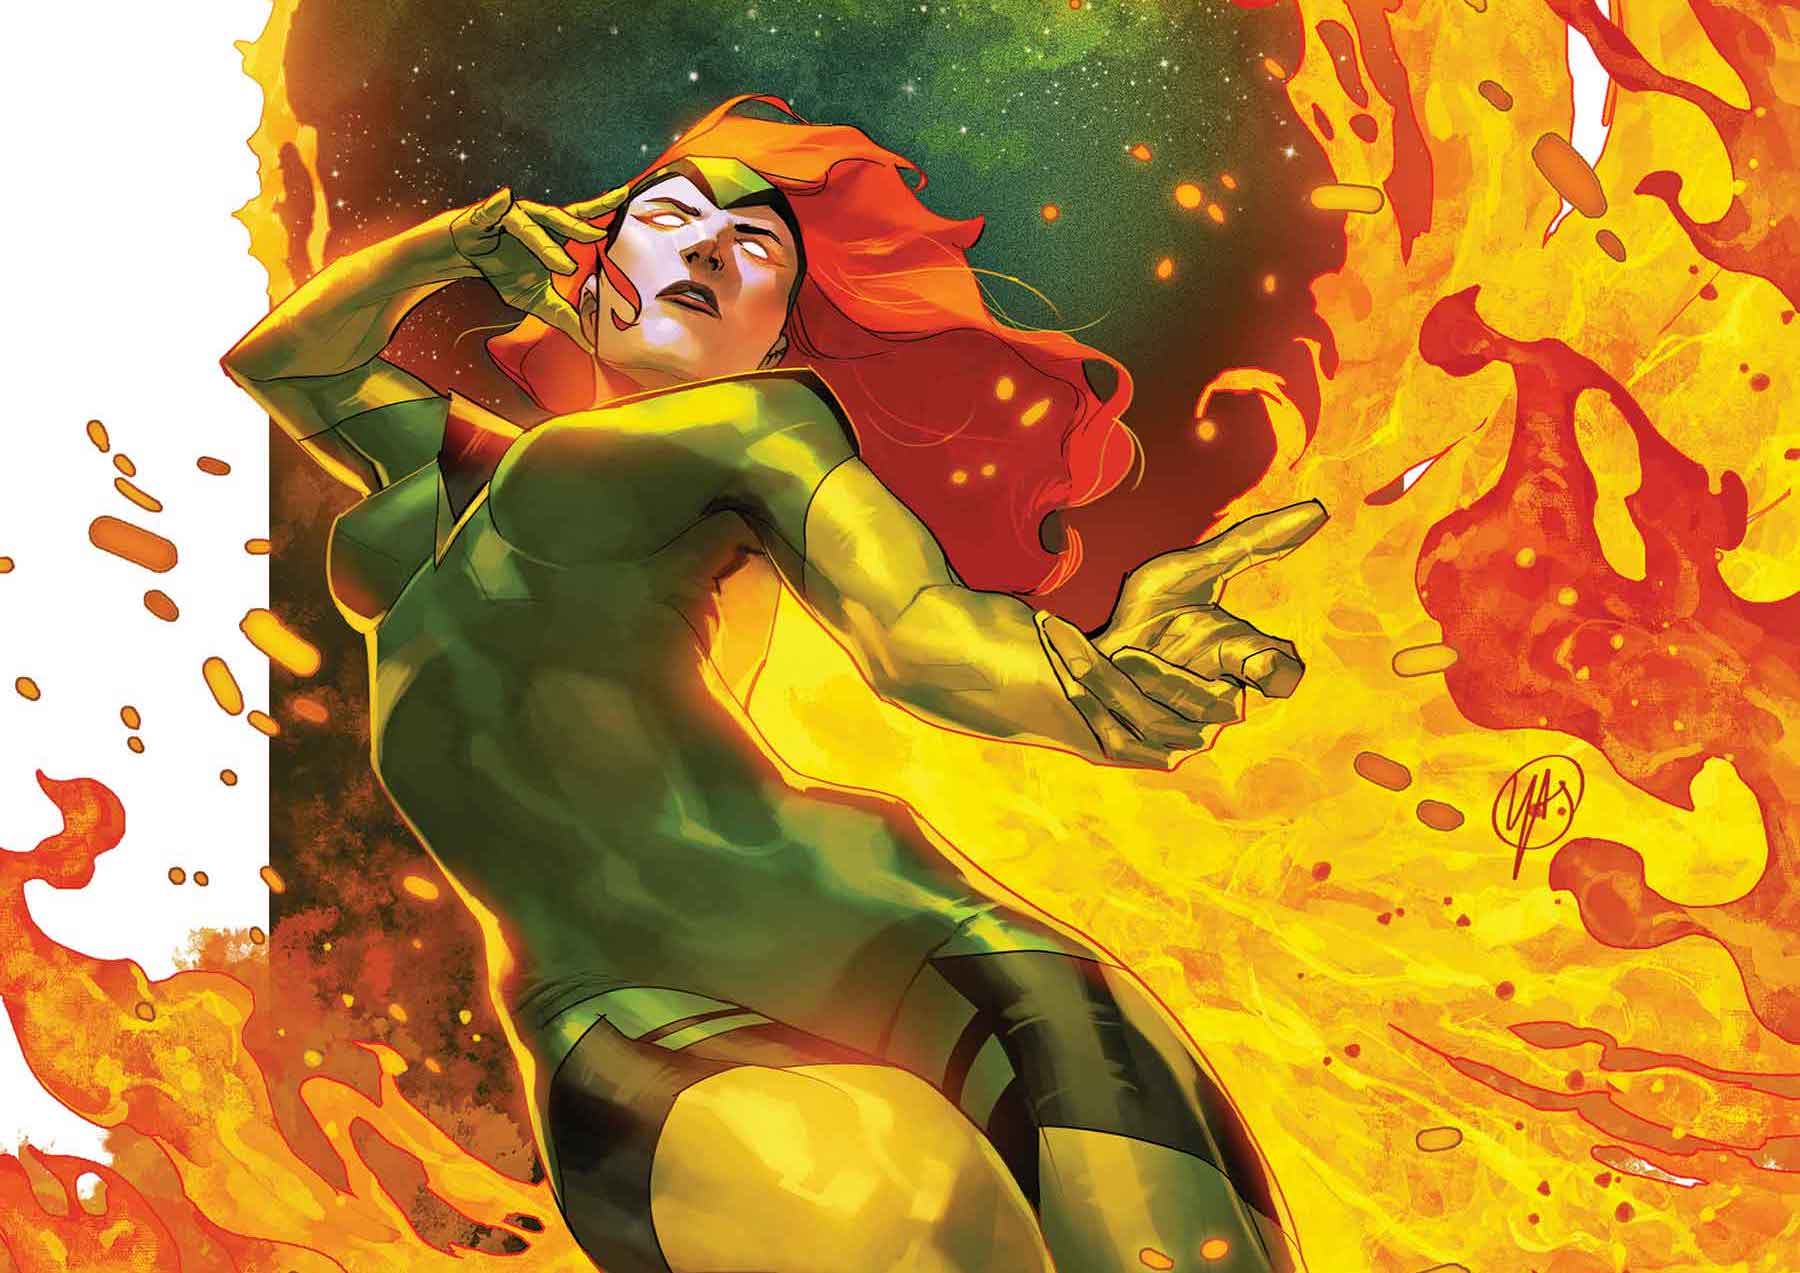 New ‘Phoenix’ #1 X-Men series to launch with creators Stephanie Phillips and Alessandro Miracolo